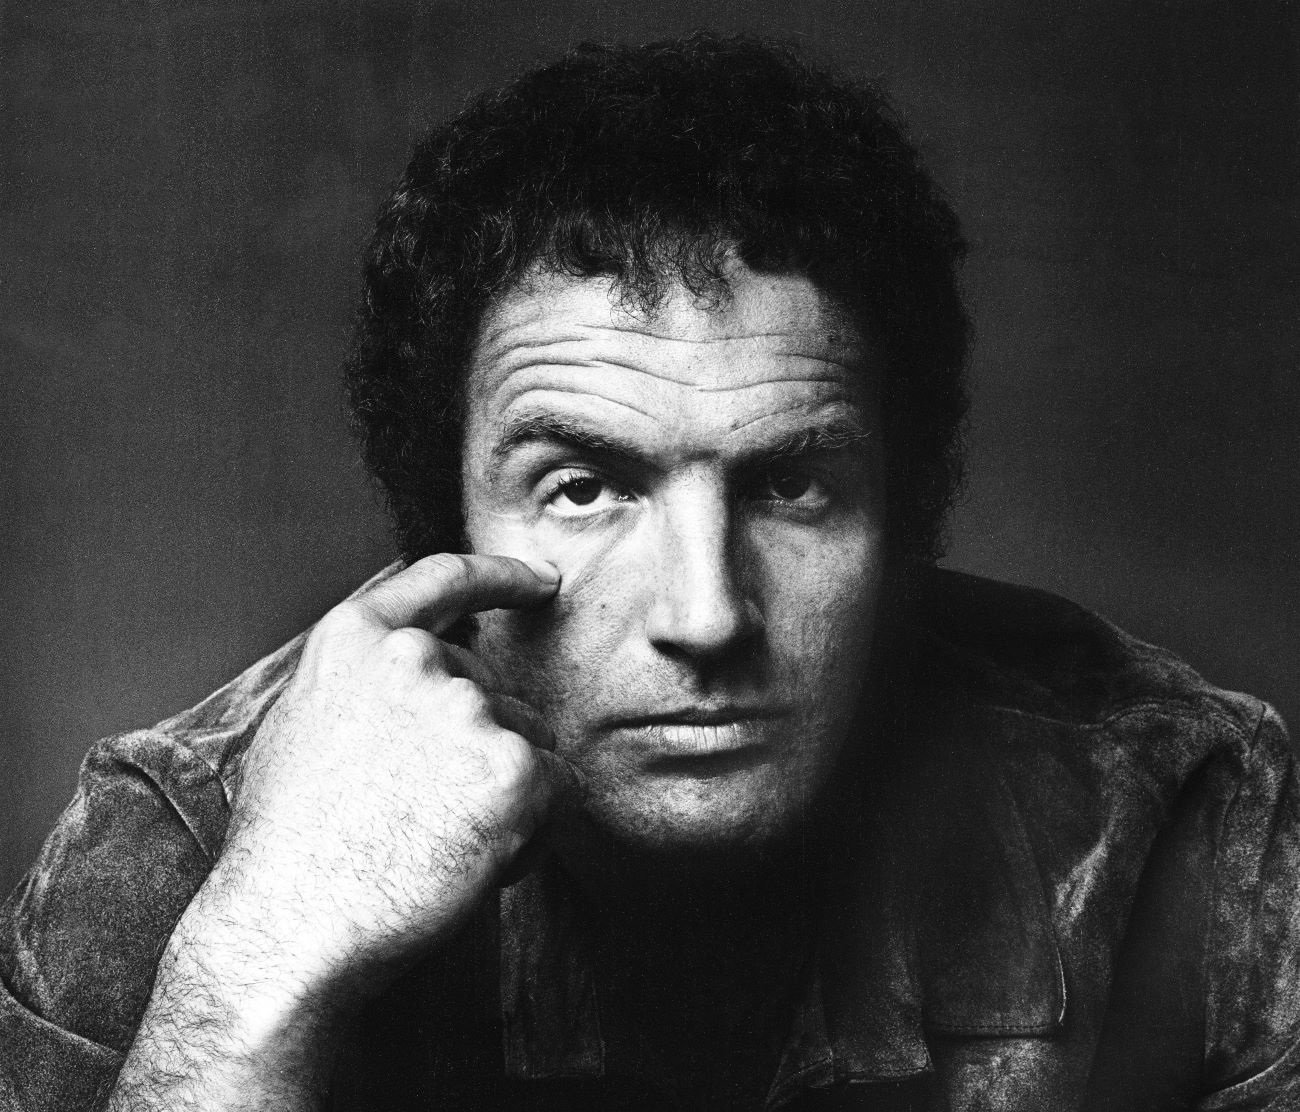 A black and white picture of James Caan with his finger touching his cheek.